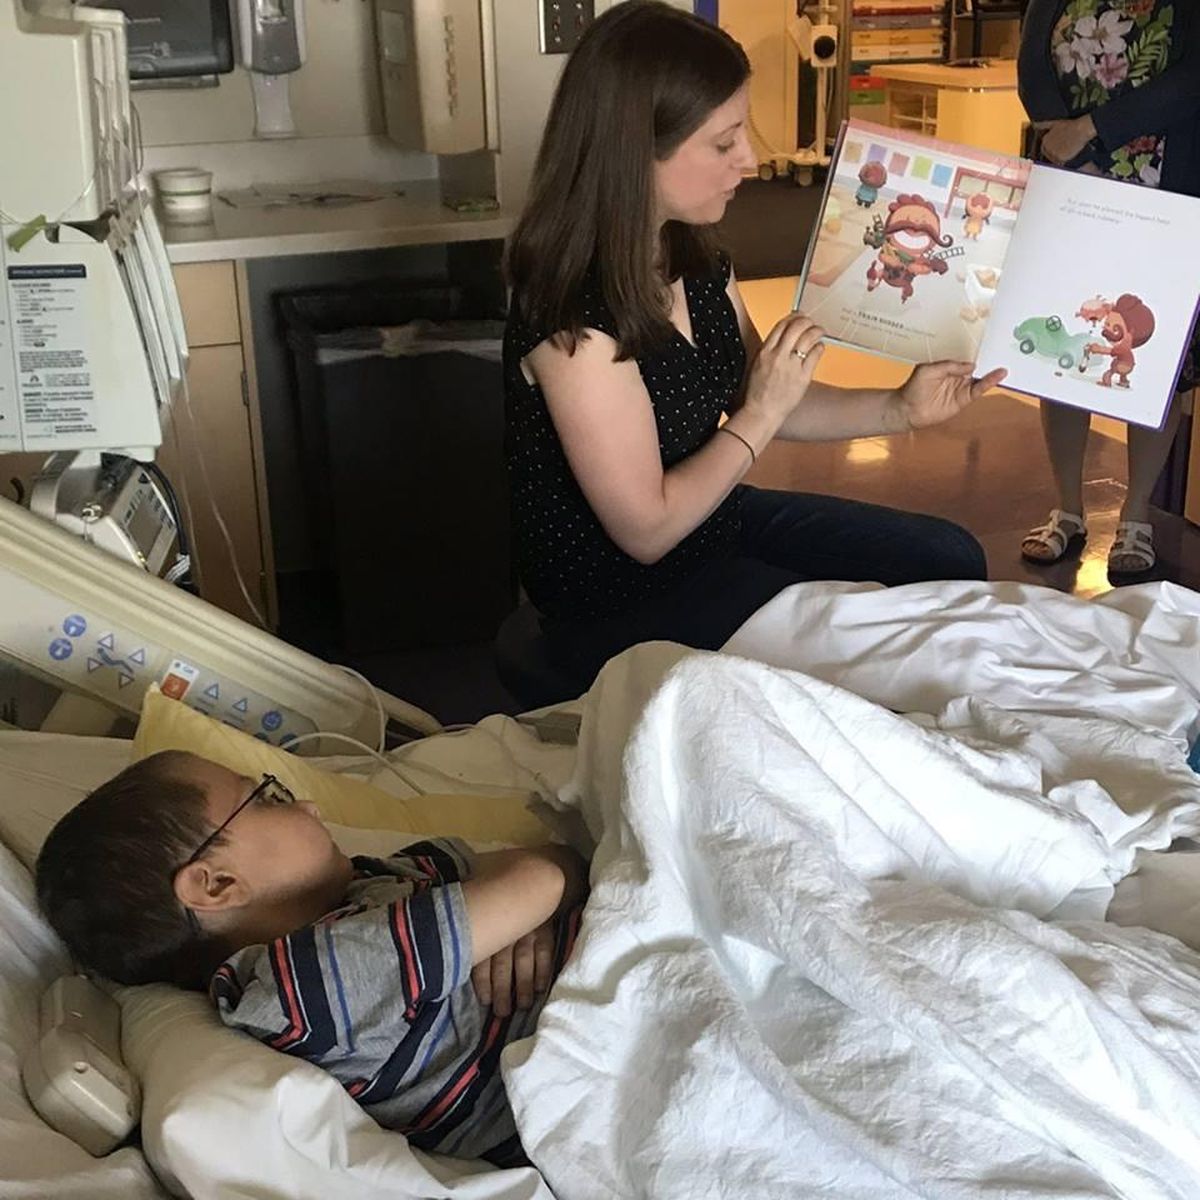 Library staffer Becky Mace reads to Kolton Anderson, 6. (Courtesy / Sacred Heart Children’s Hospital)